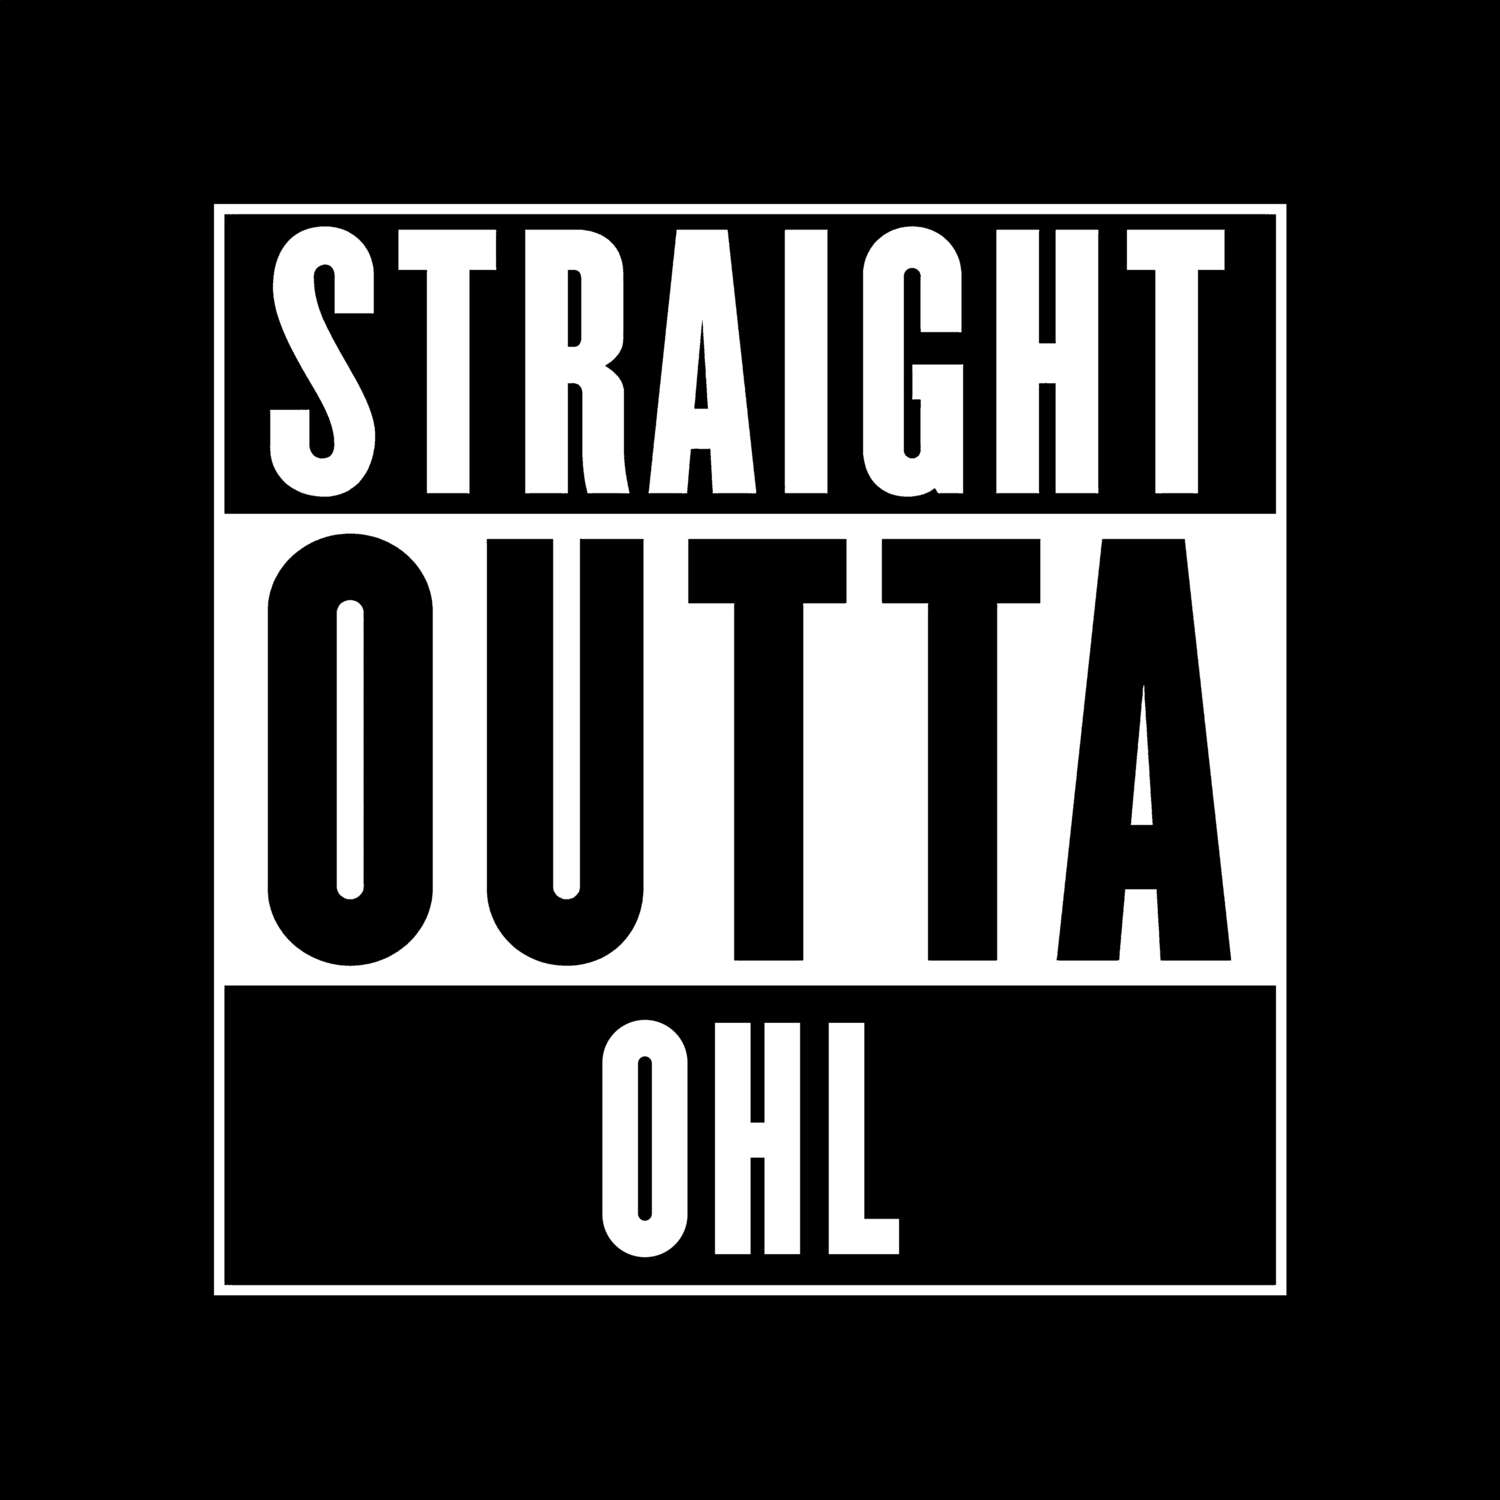 Ohl T-Shirt »Straight Outta«